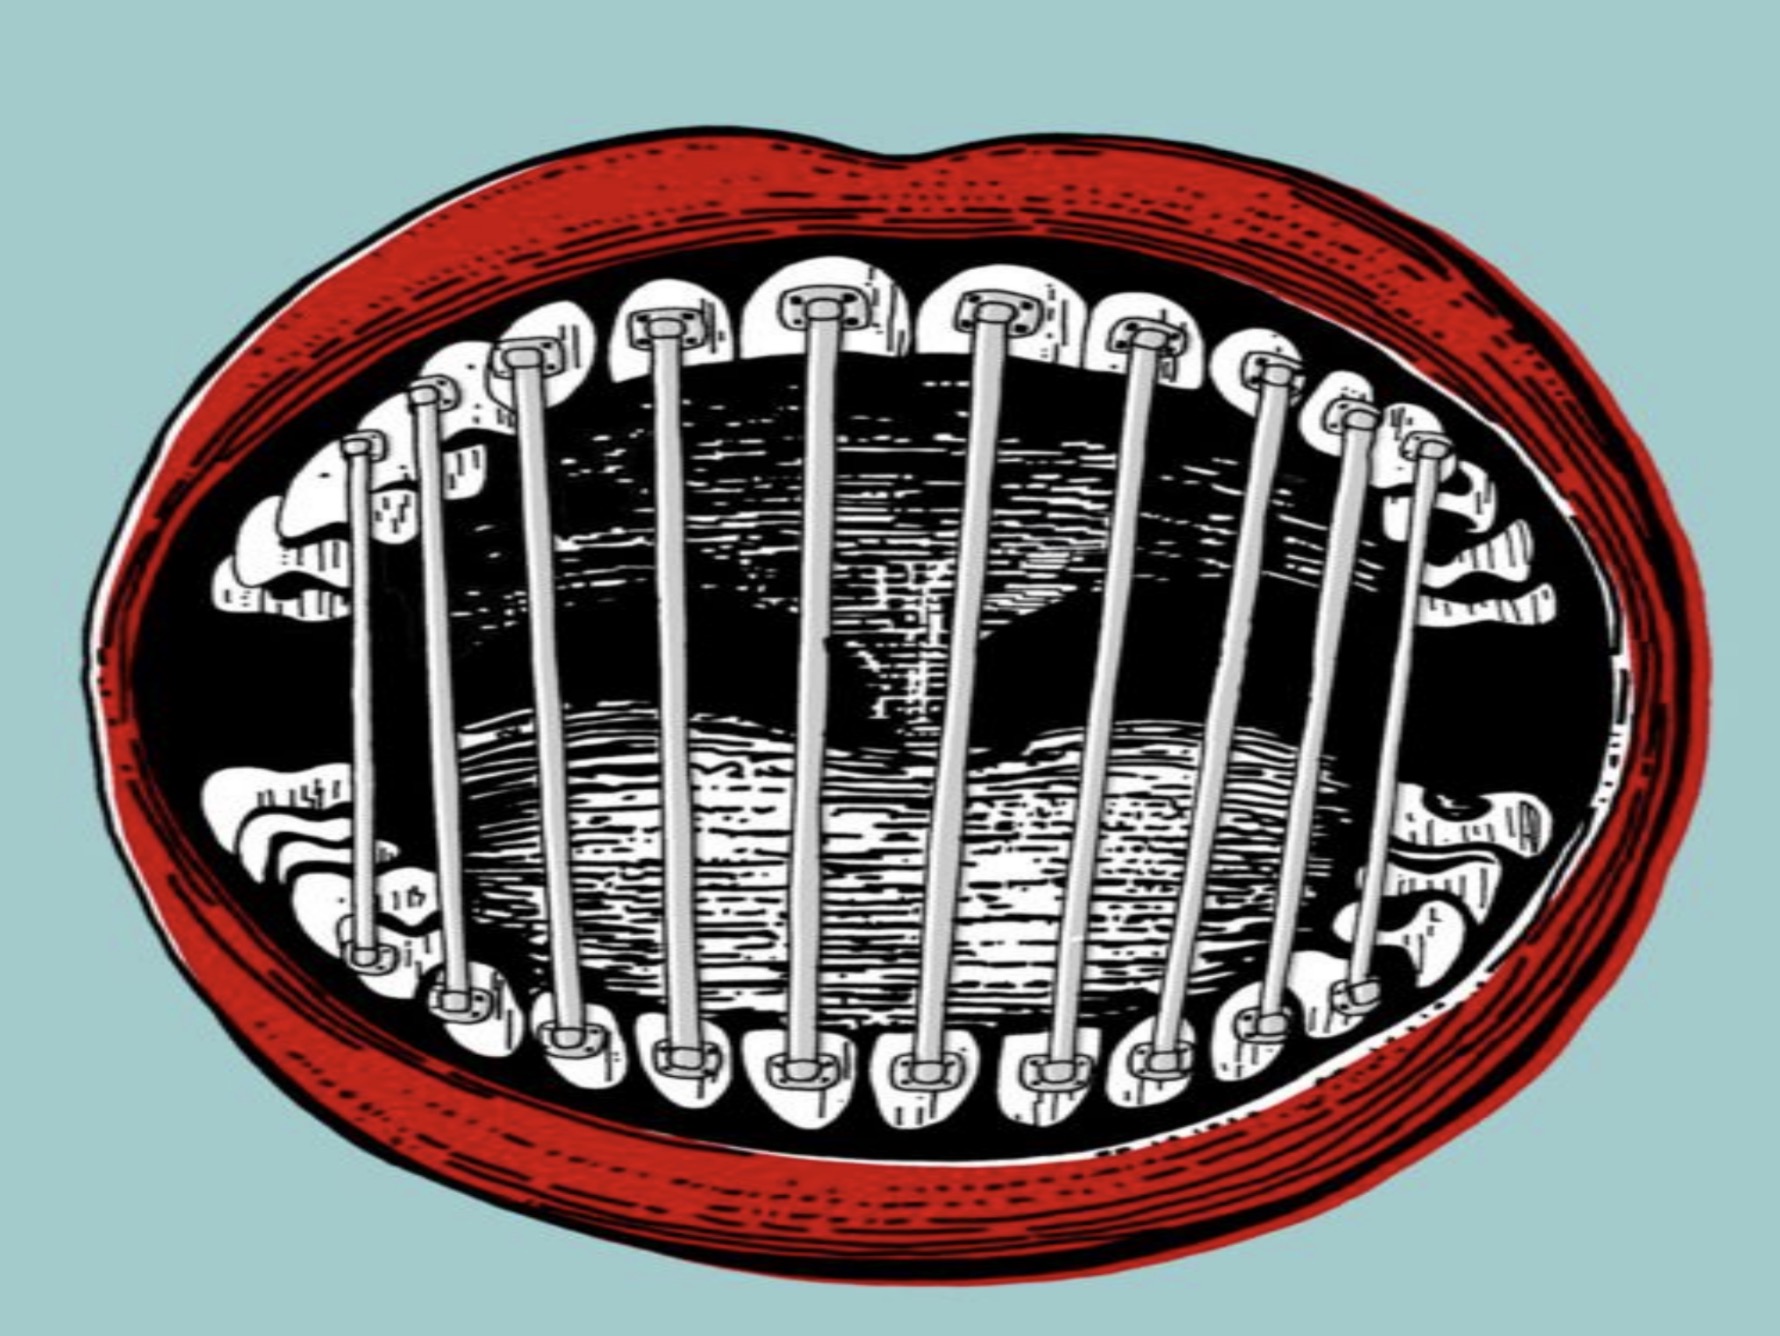 illustration of mouth with braces and bars like a prison